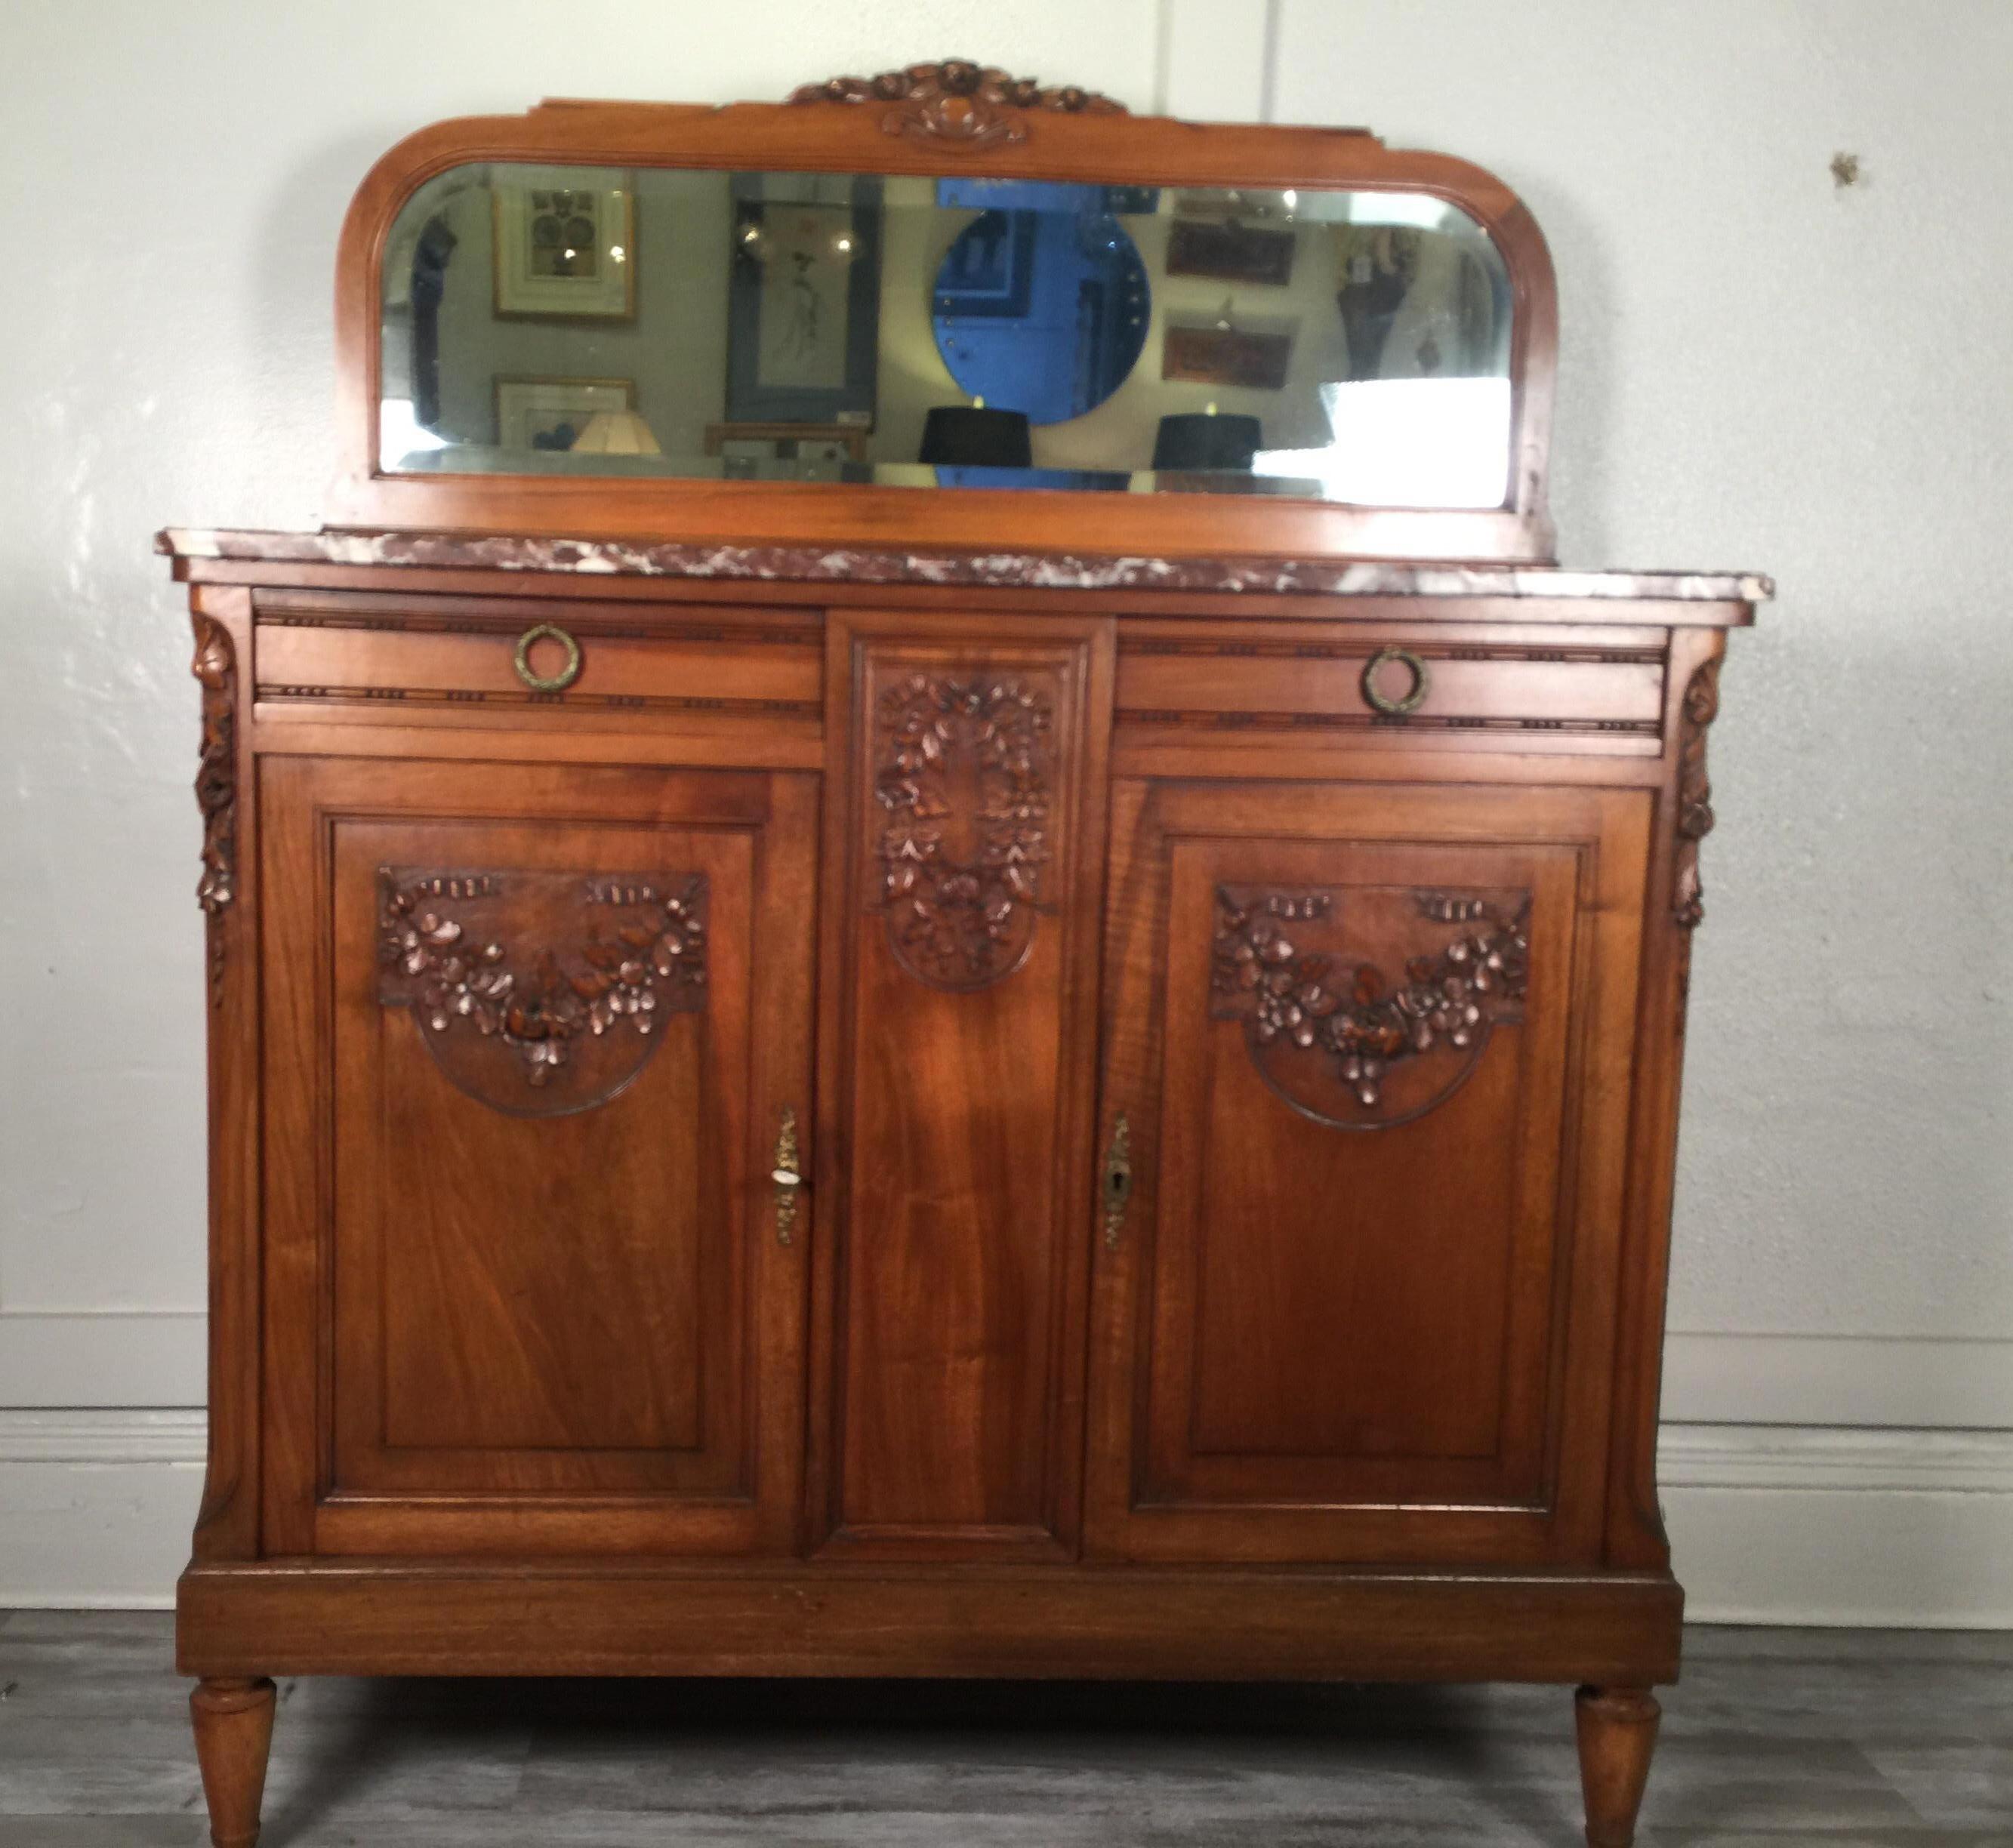 French carved walnut two-door marble-top server with mirrored back, circa 1890-1900
Can be used as a server or as a dry bar dimensions: 48